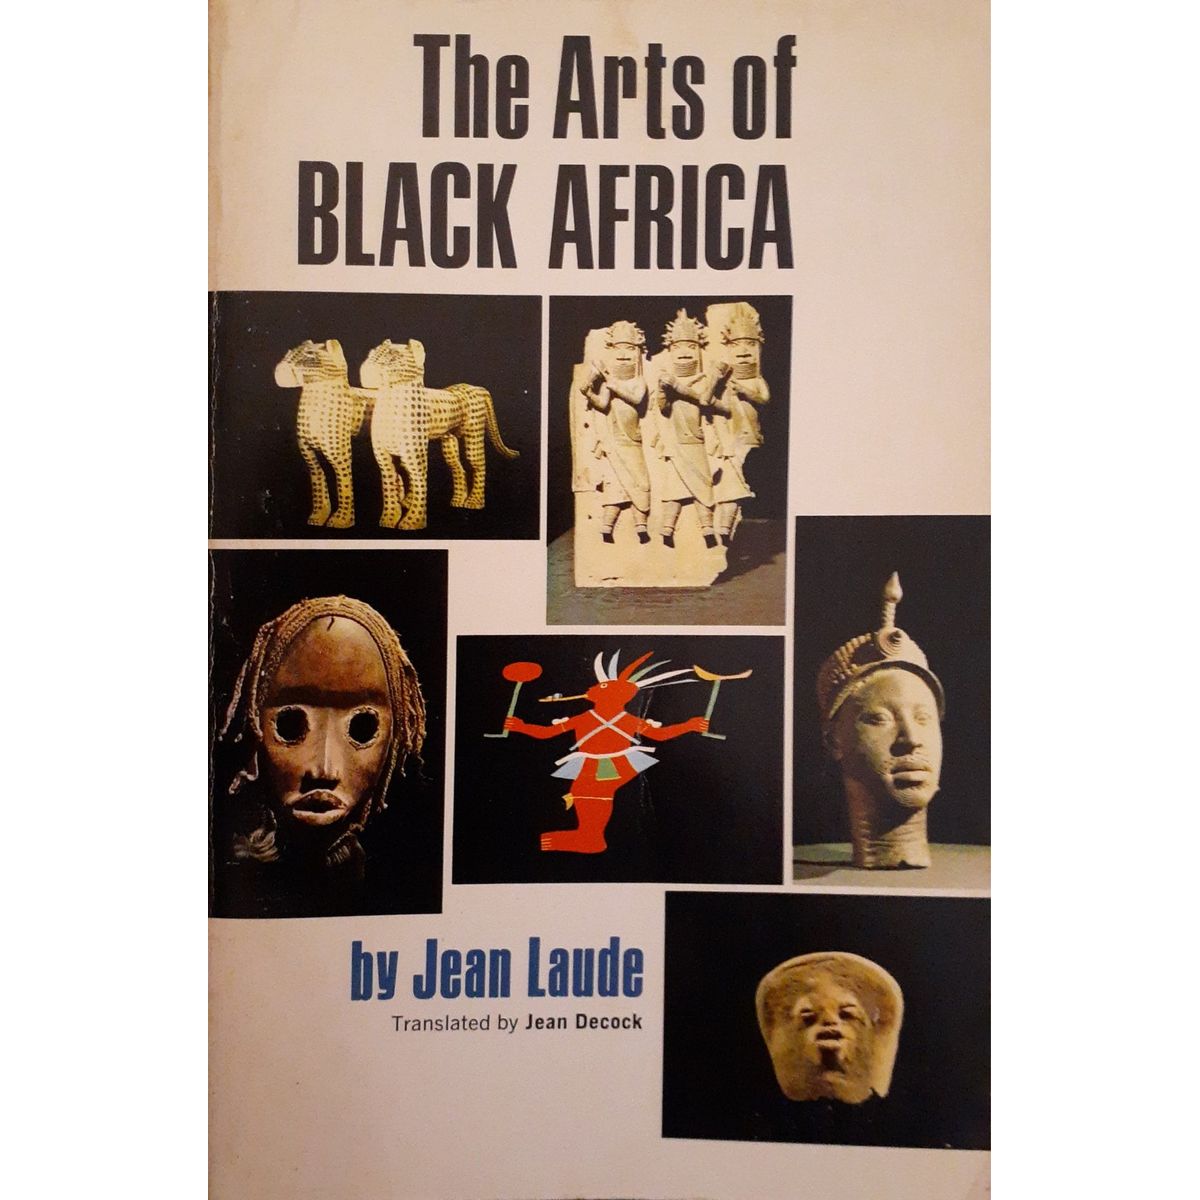 ISBN: 9780520023581 / 0520023587 - The Arts of Black Africa by Jean Laude [1973]